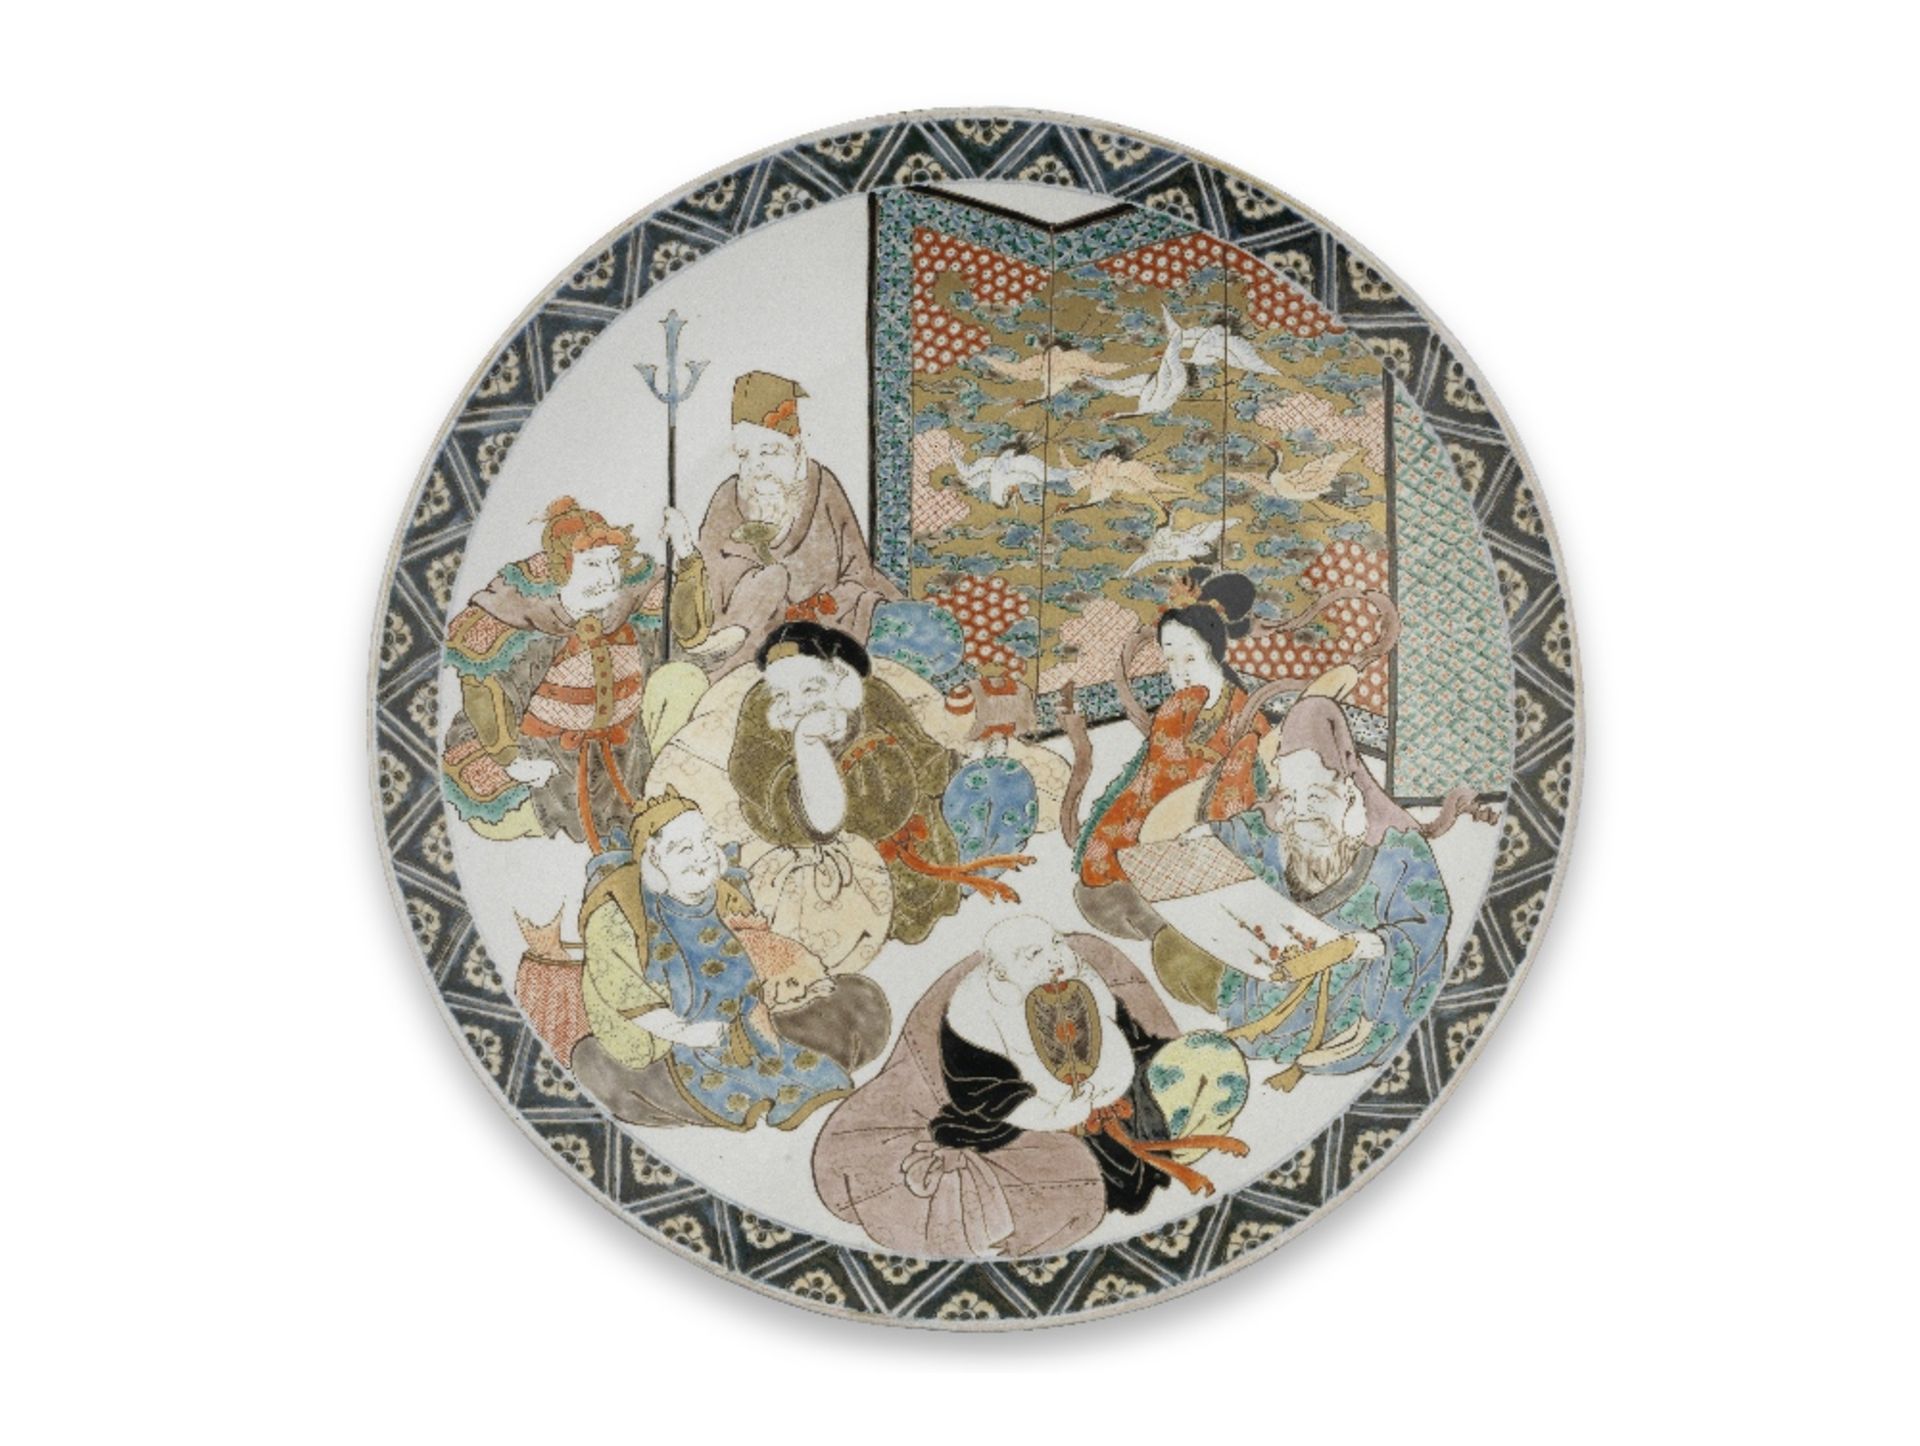 AN IMARI-WARE PORCELAIN CHARGER Meiji era (1868-1912), late 19th/early 20th century